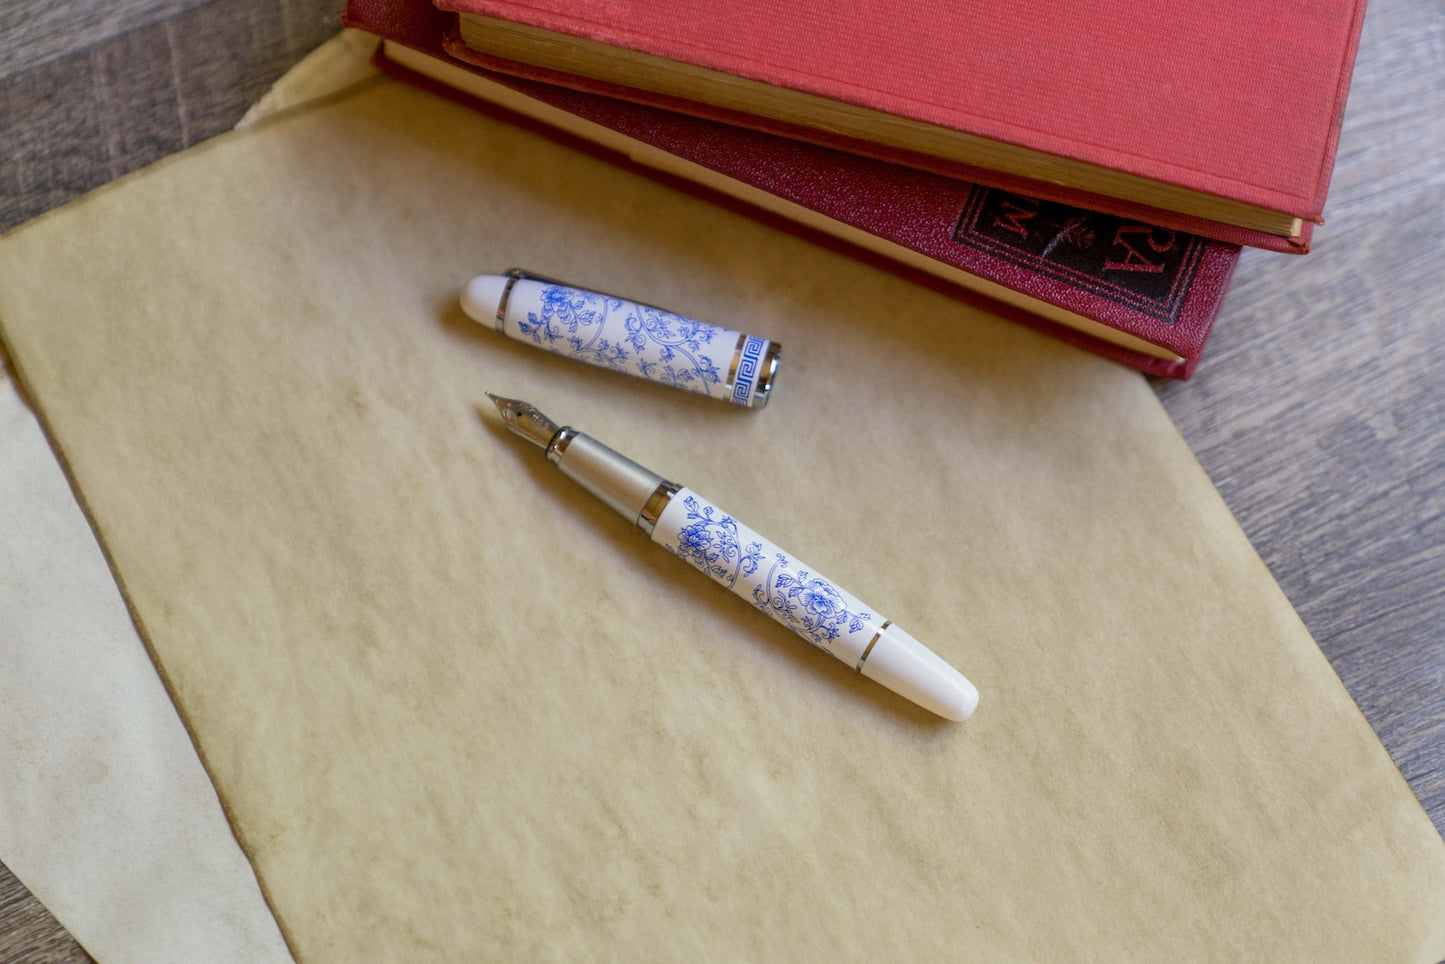 Blooming Beauty Fountain Pen - Blue & White Floral Ceramic Style